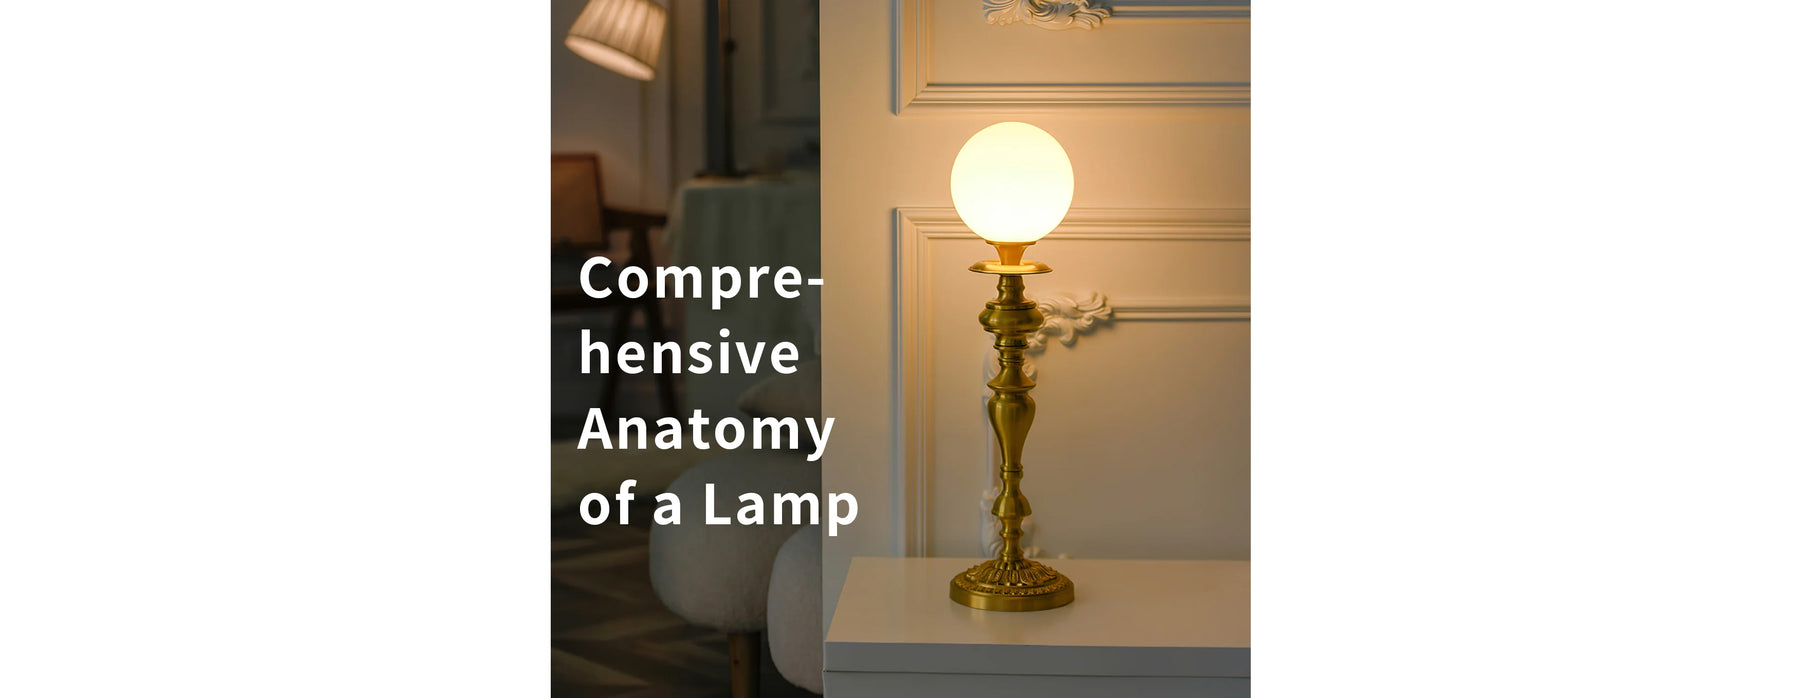 Comprehensive Anatomy of a Lamp